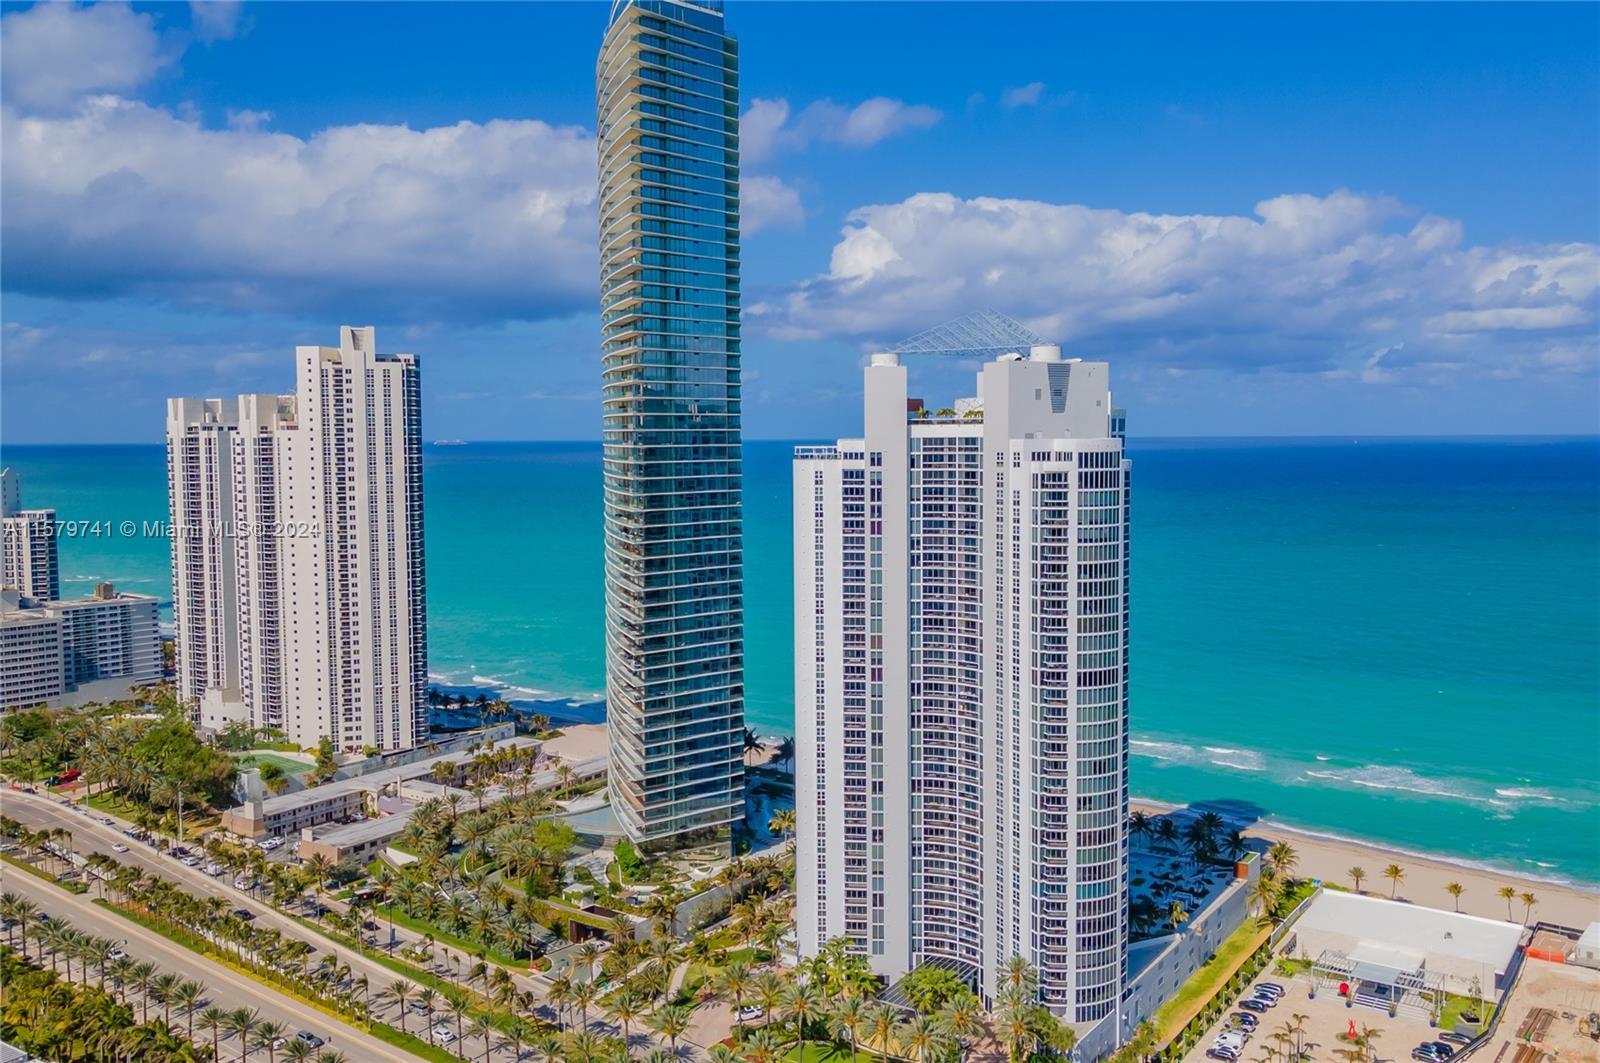 Photo of 18911 Collins Ave #902 in Sunny Isles Beach, FL